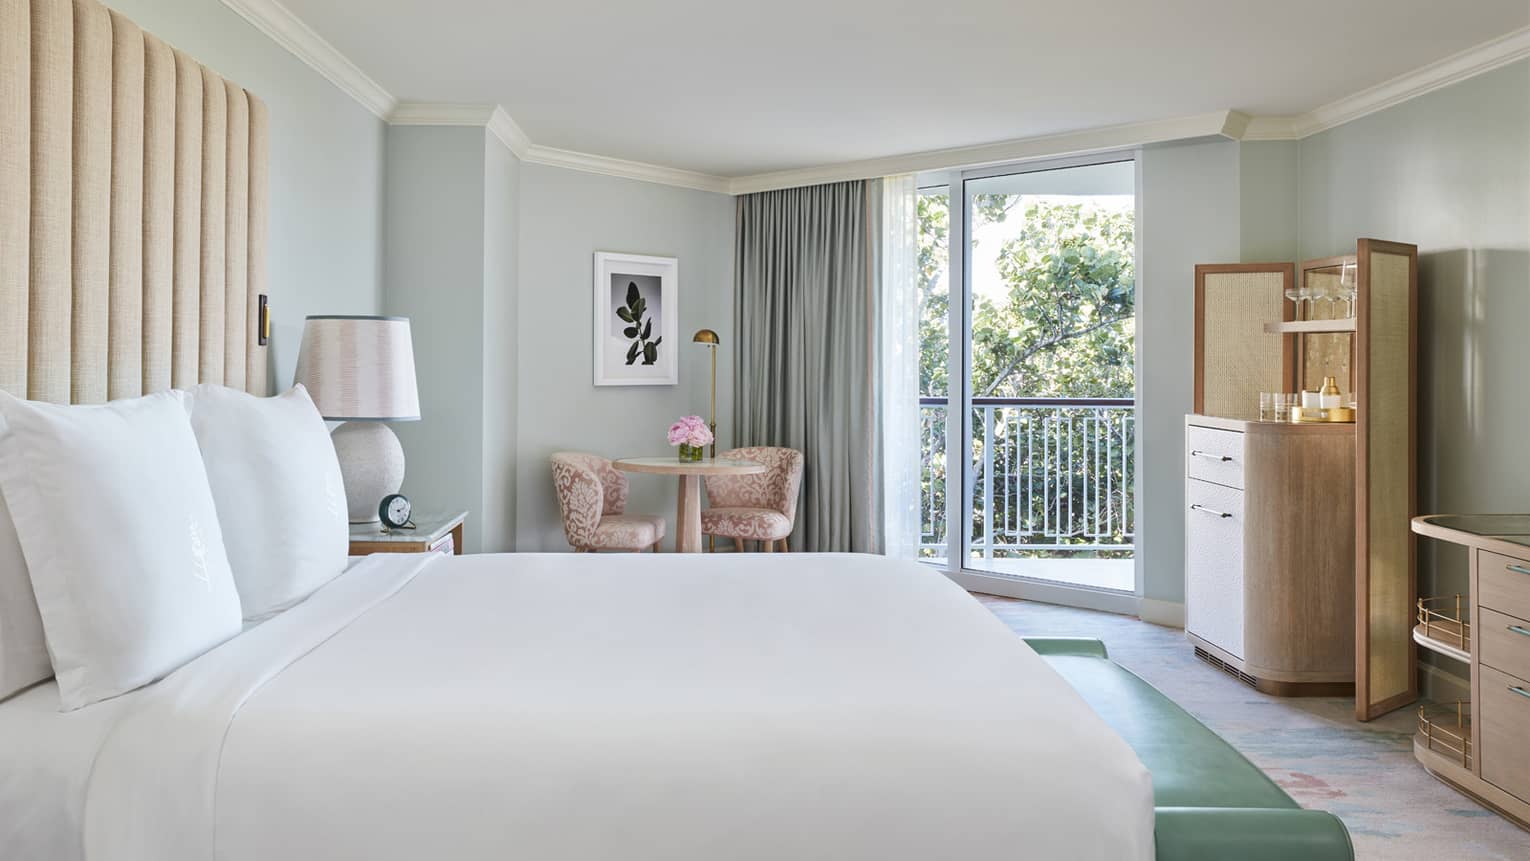 Guest room with a Four Seasons queen bed and garden views